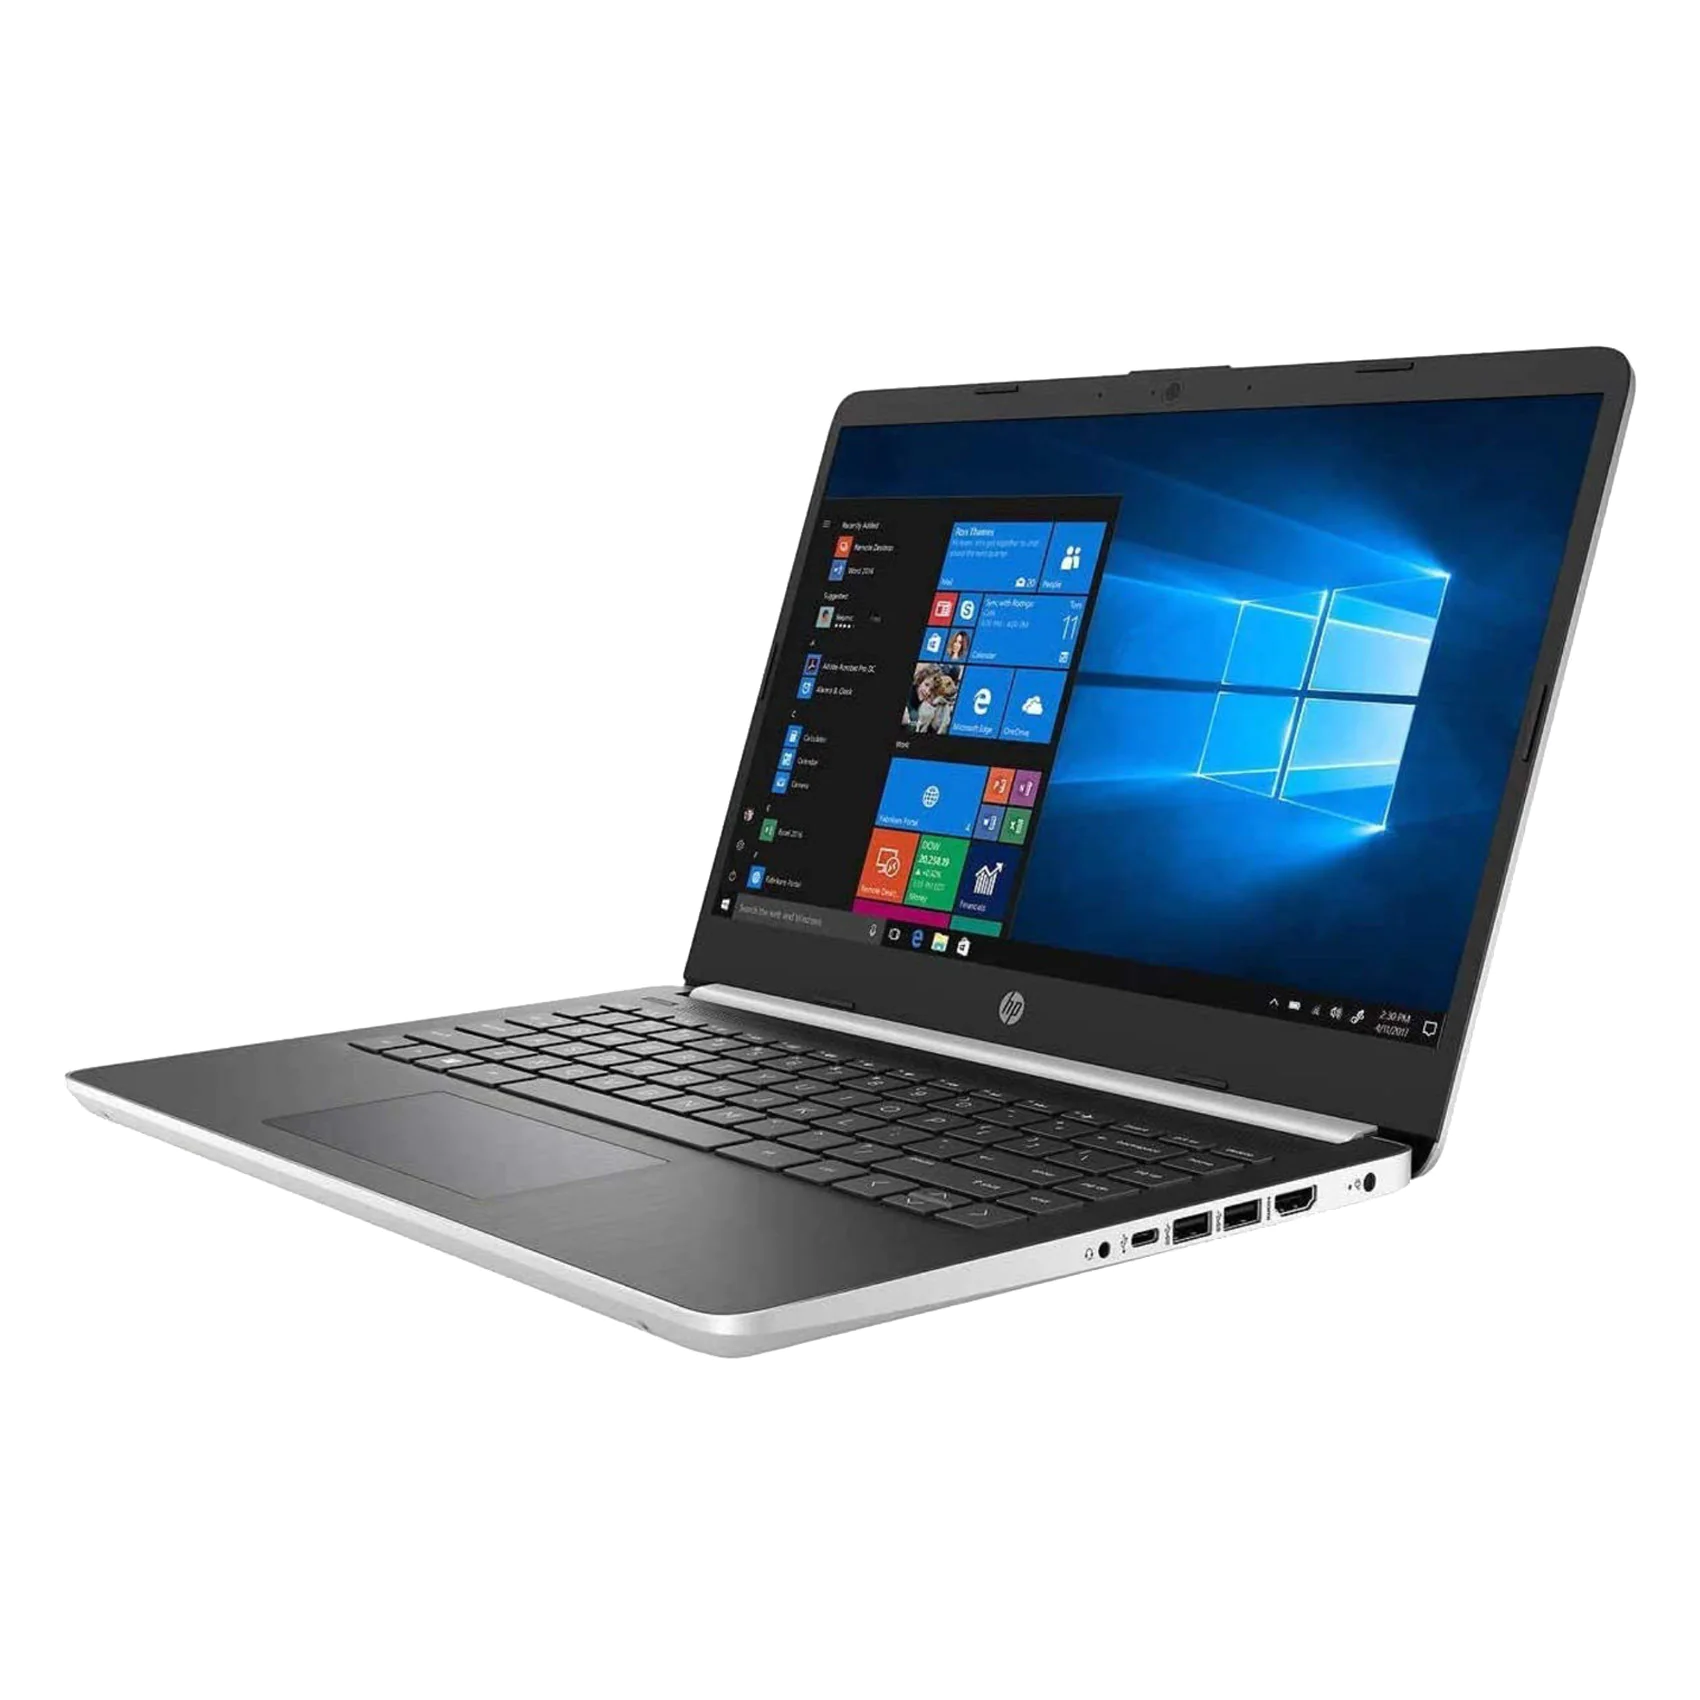 Laptops Promotions offer - in Amman #2064 - 1  image 